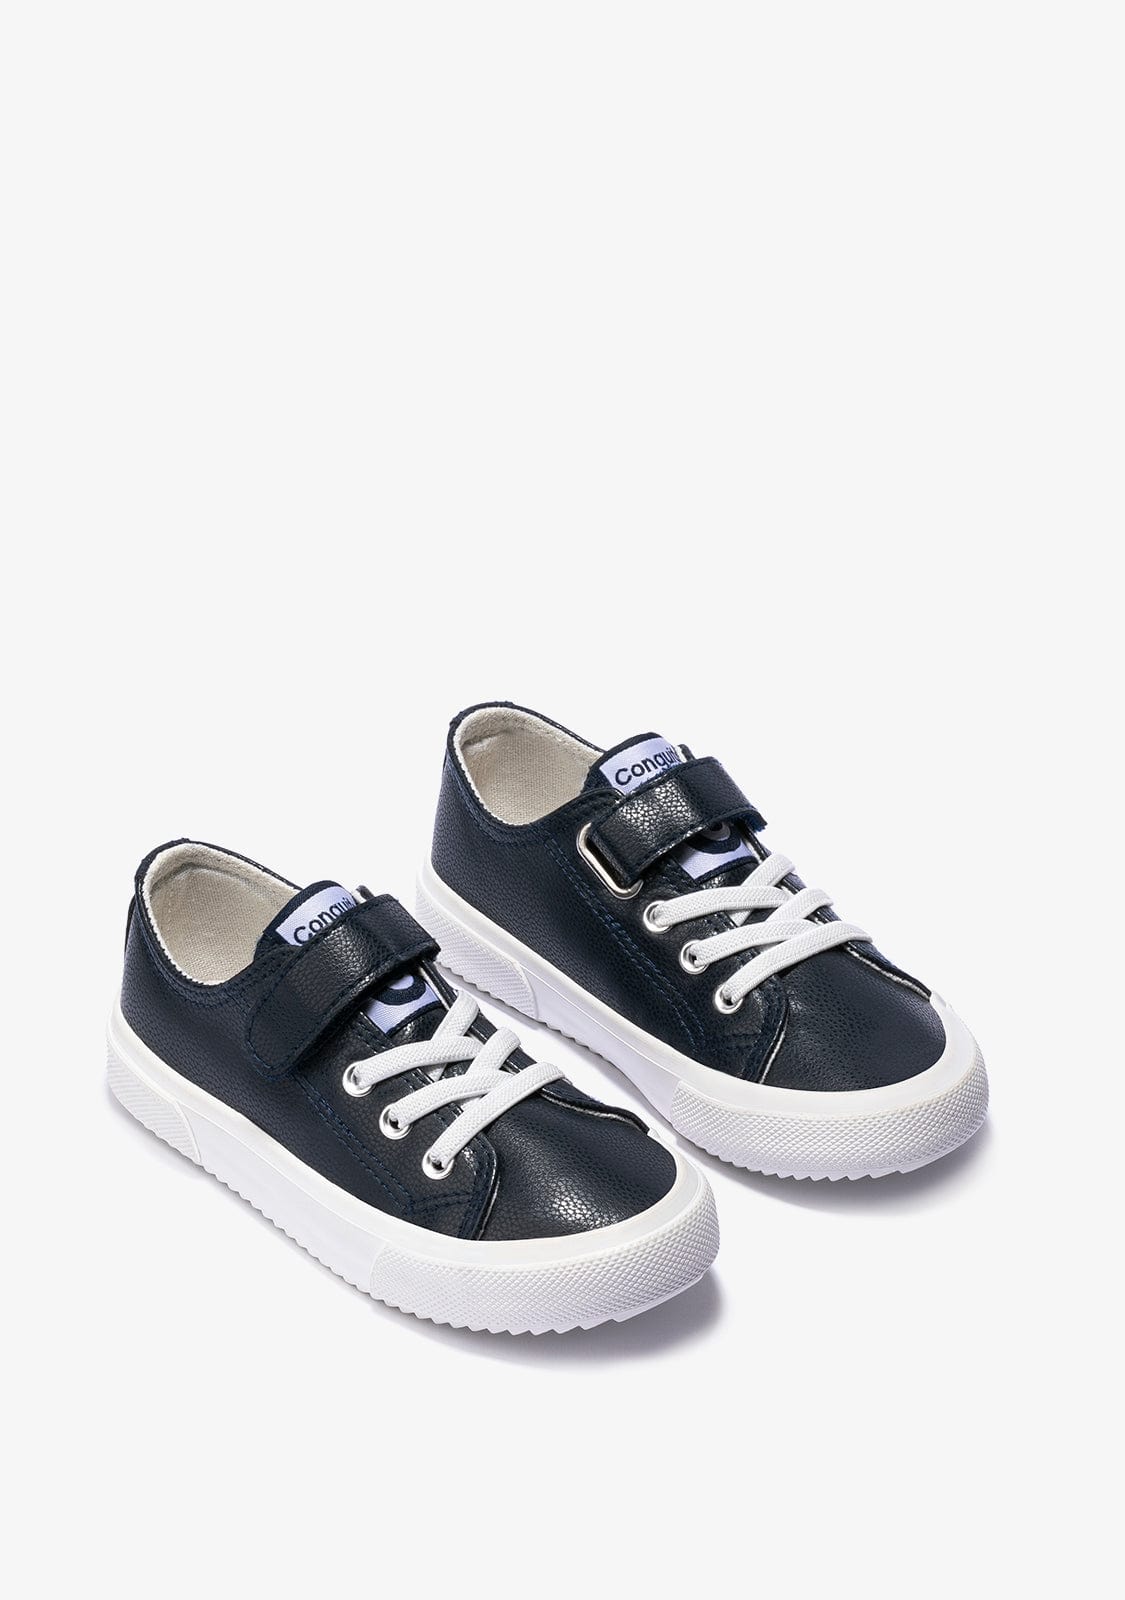 CONGUITOS Shoes Unisex Navy Adherent Strip Sneakers Micronapa